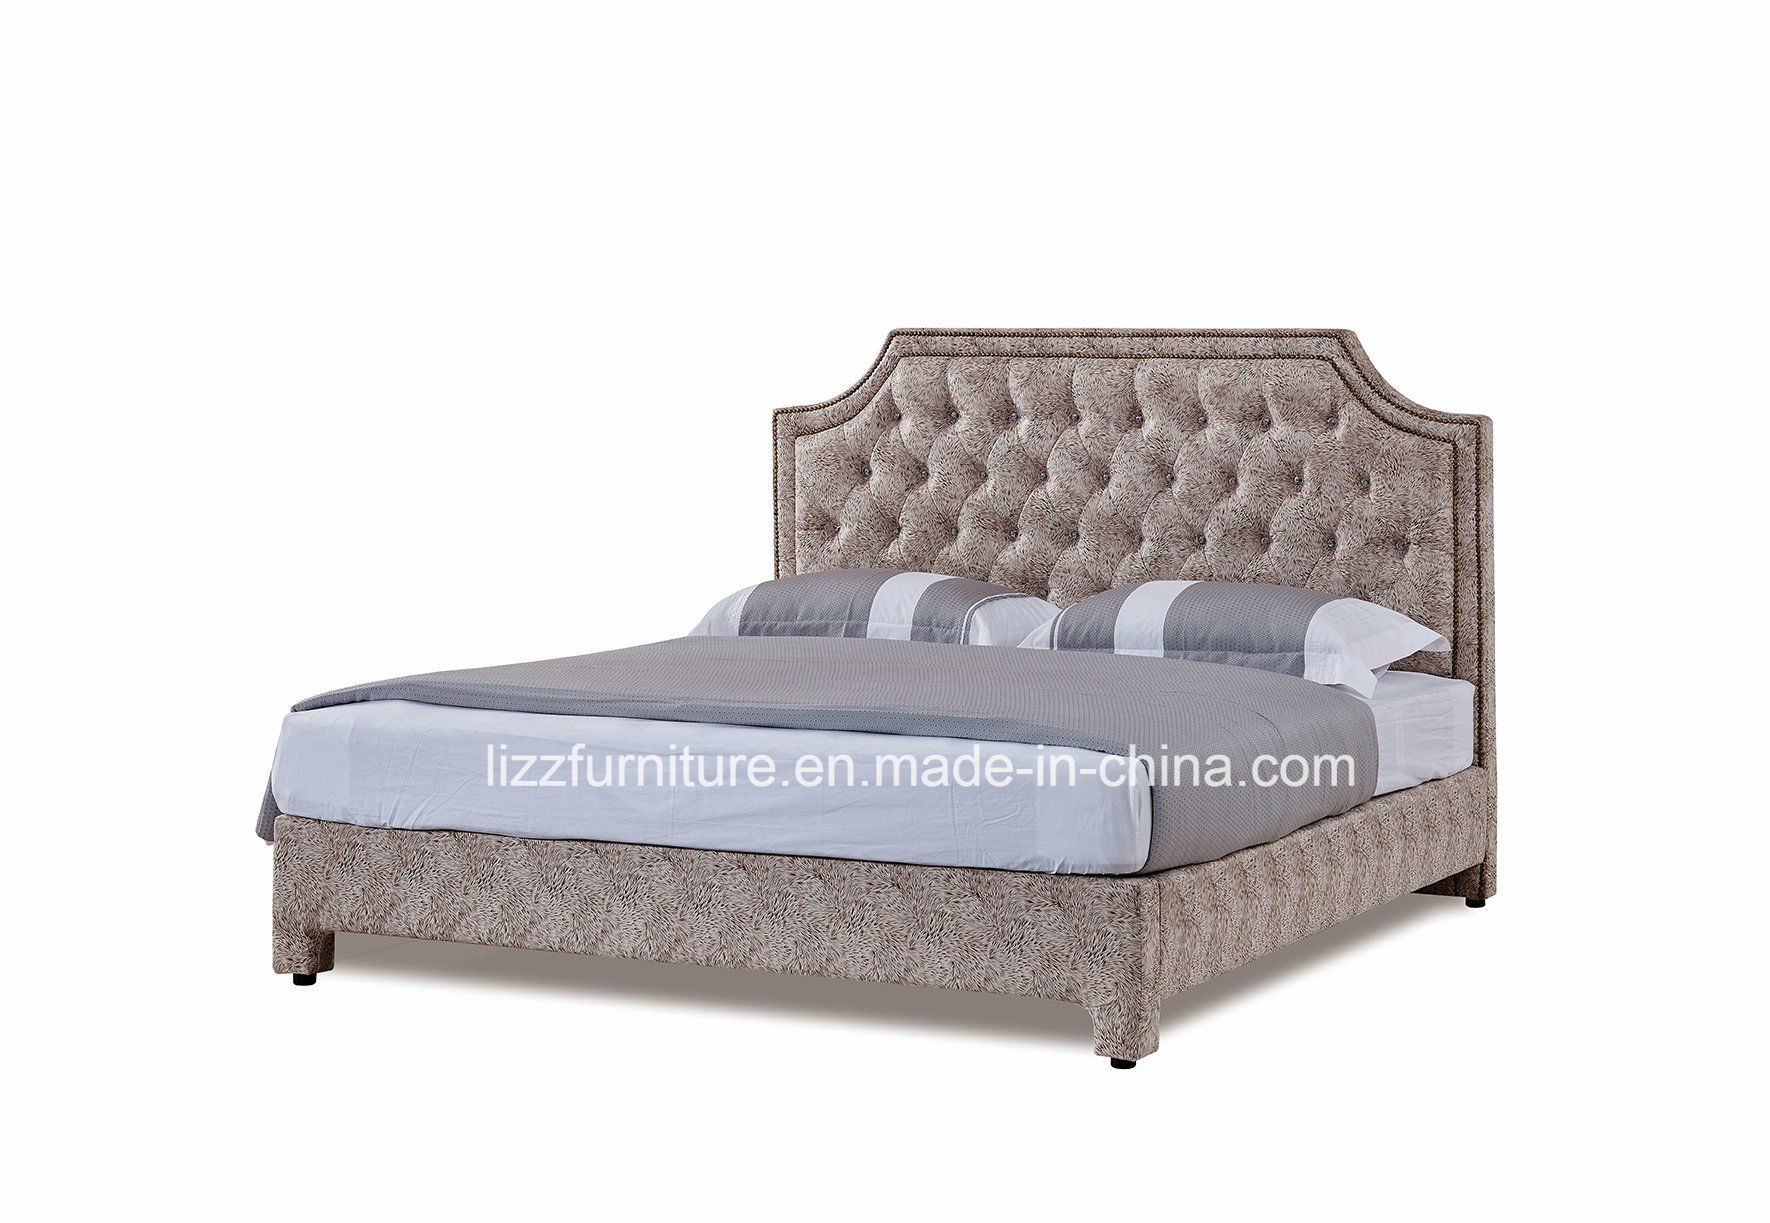 Classic Bedroom Furnishing Set Luxury King Size Leather Bed